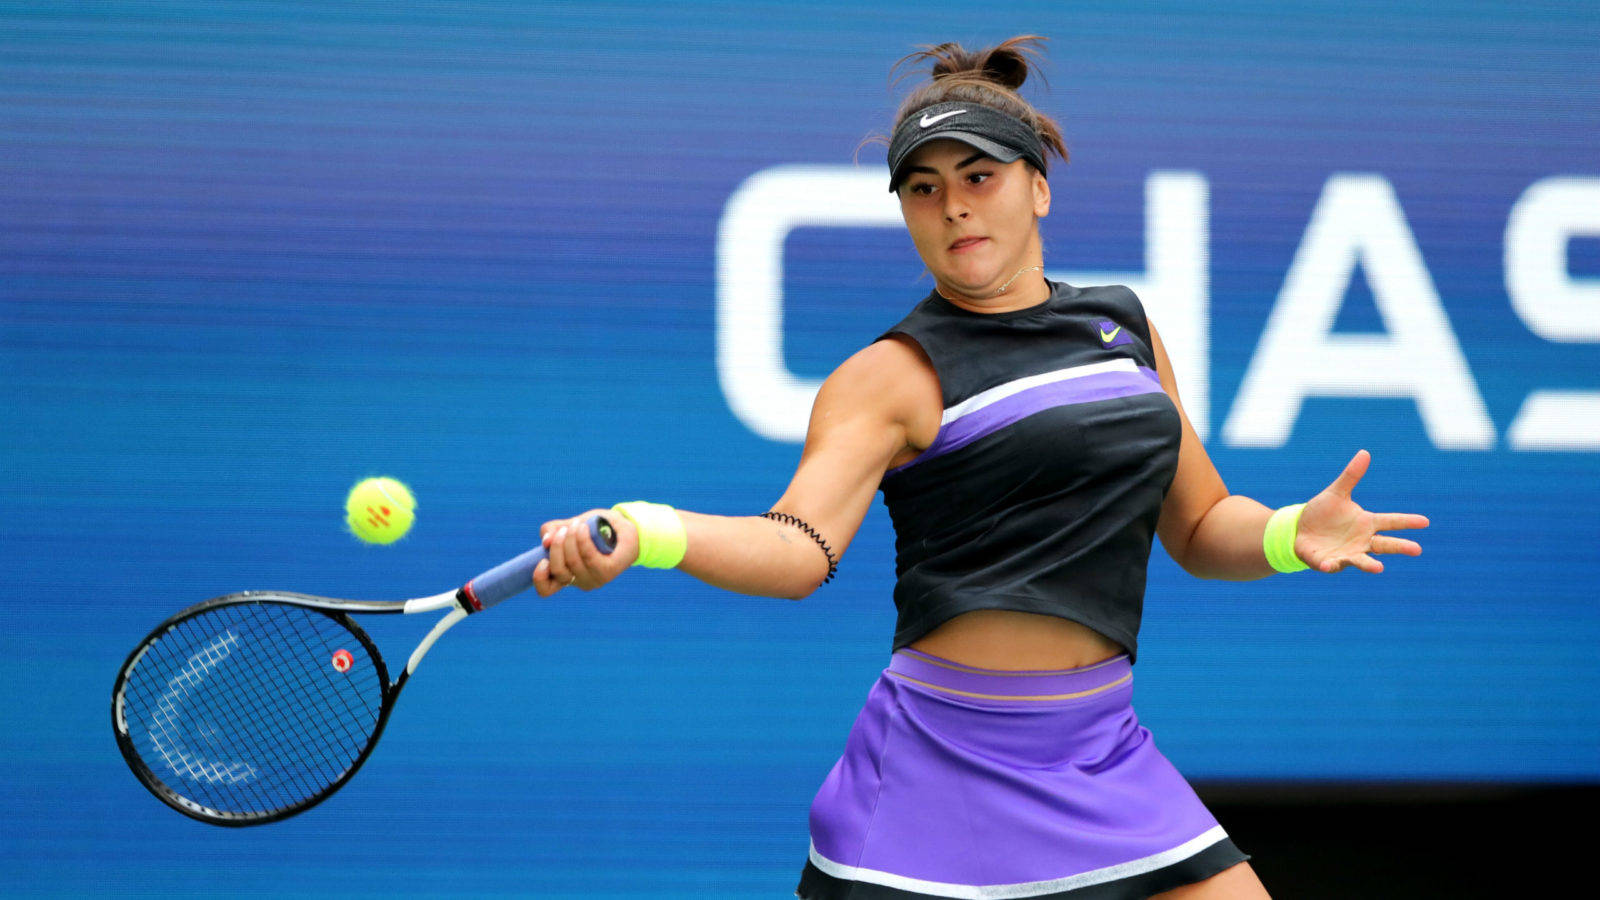 Professional Tennis Player - Bianca Andreescu in Action Wallpaper